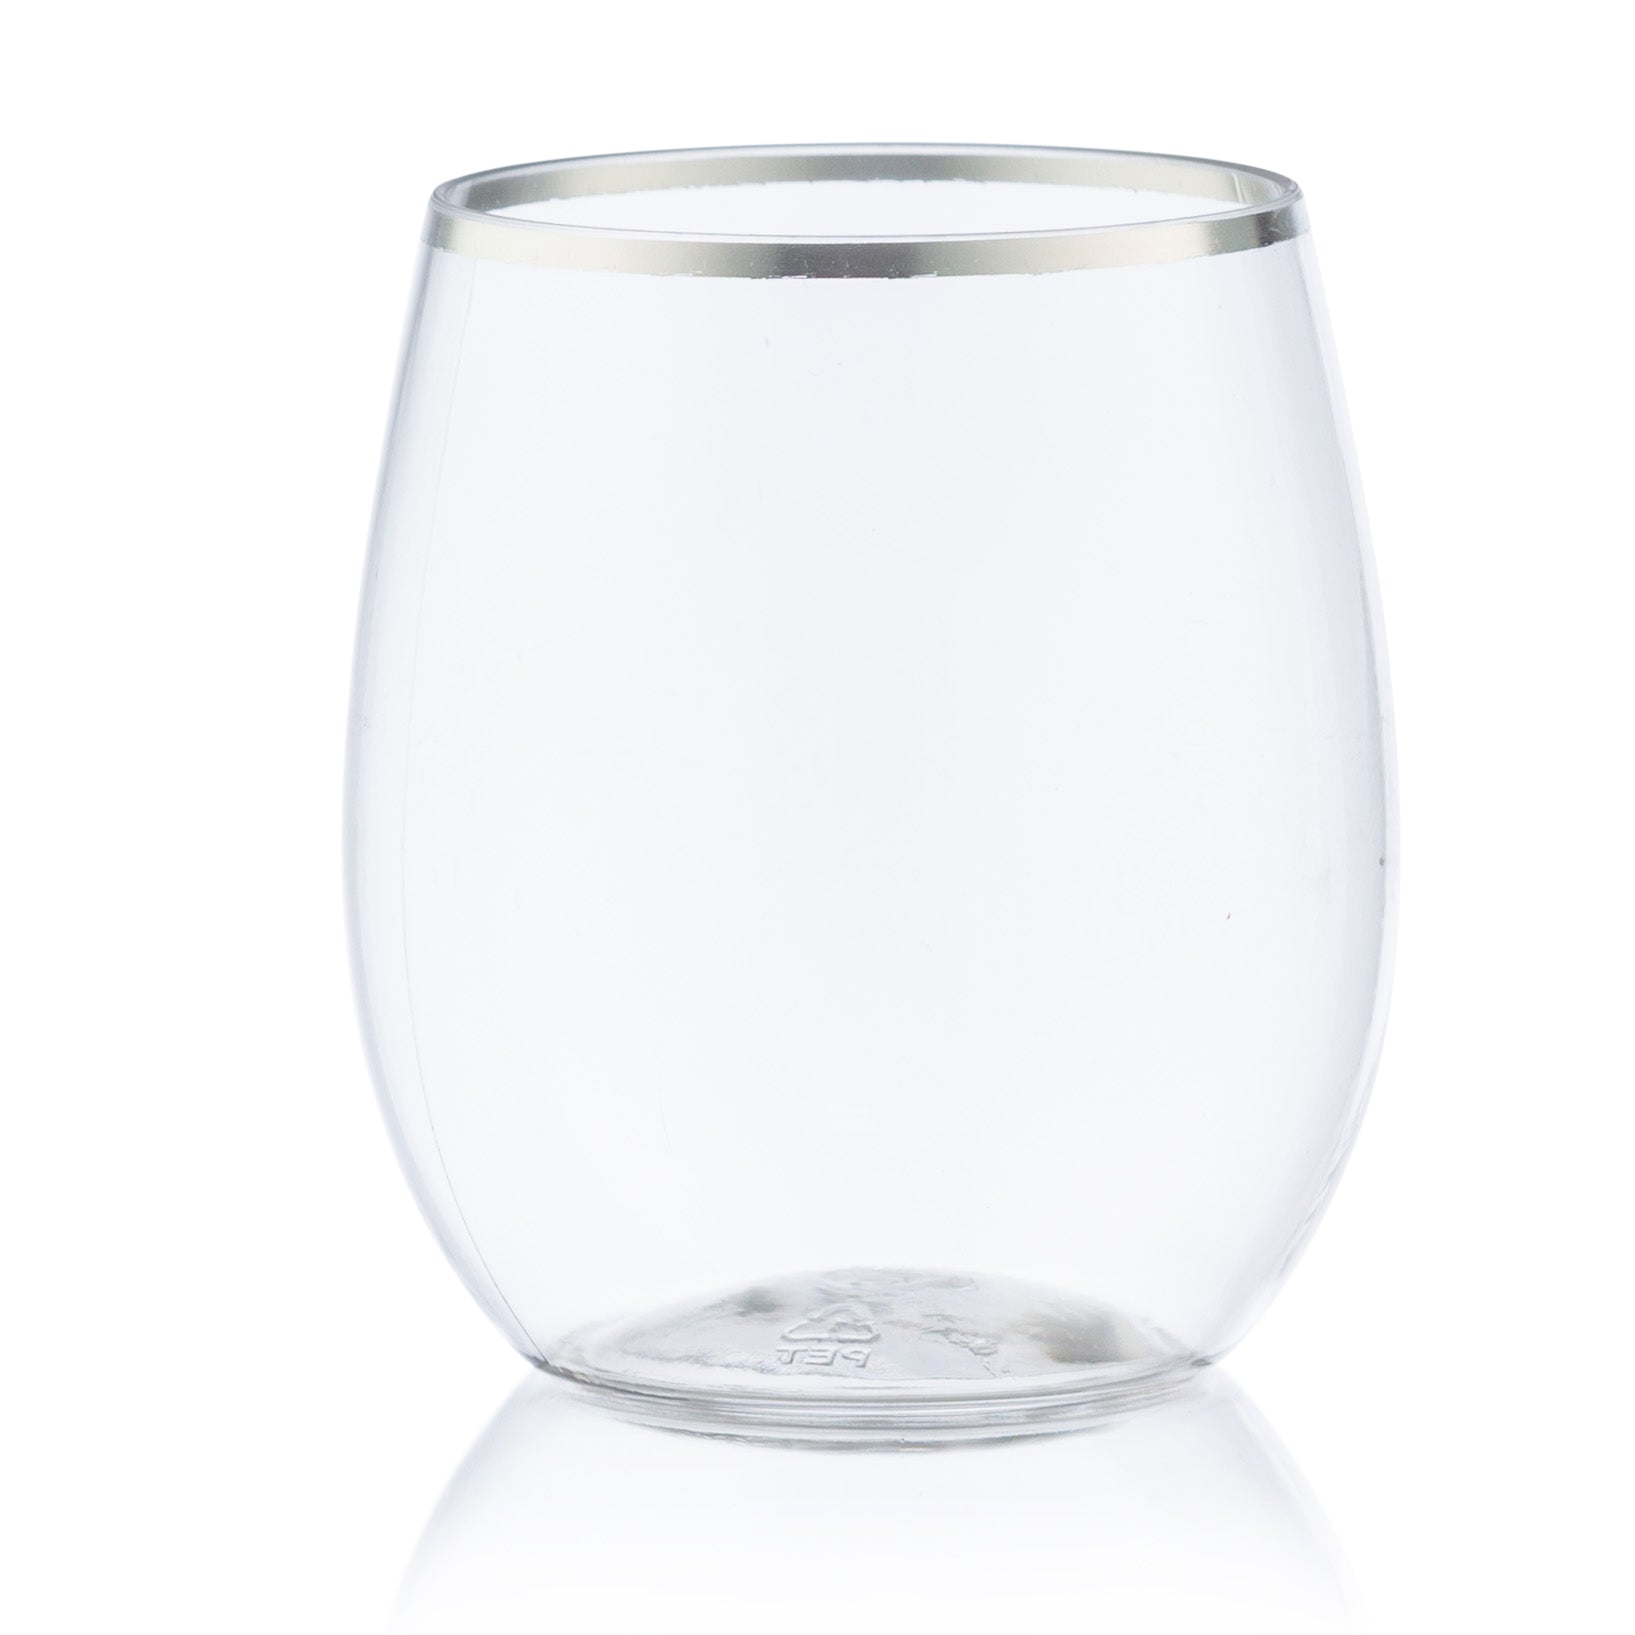 7 oz Plastic Wine Glasses with Stems, Silver Rimmed Disposable